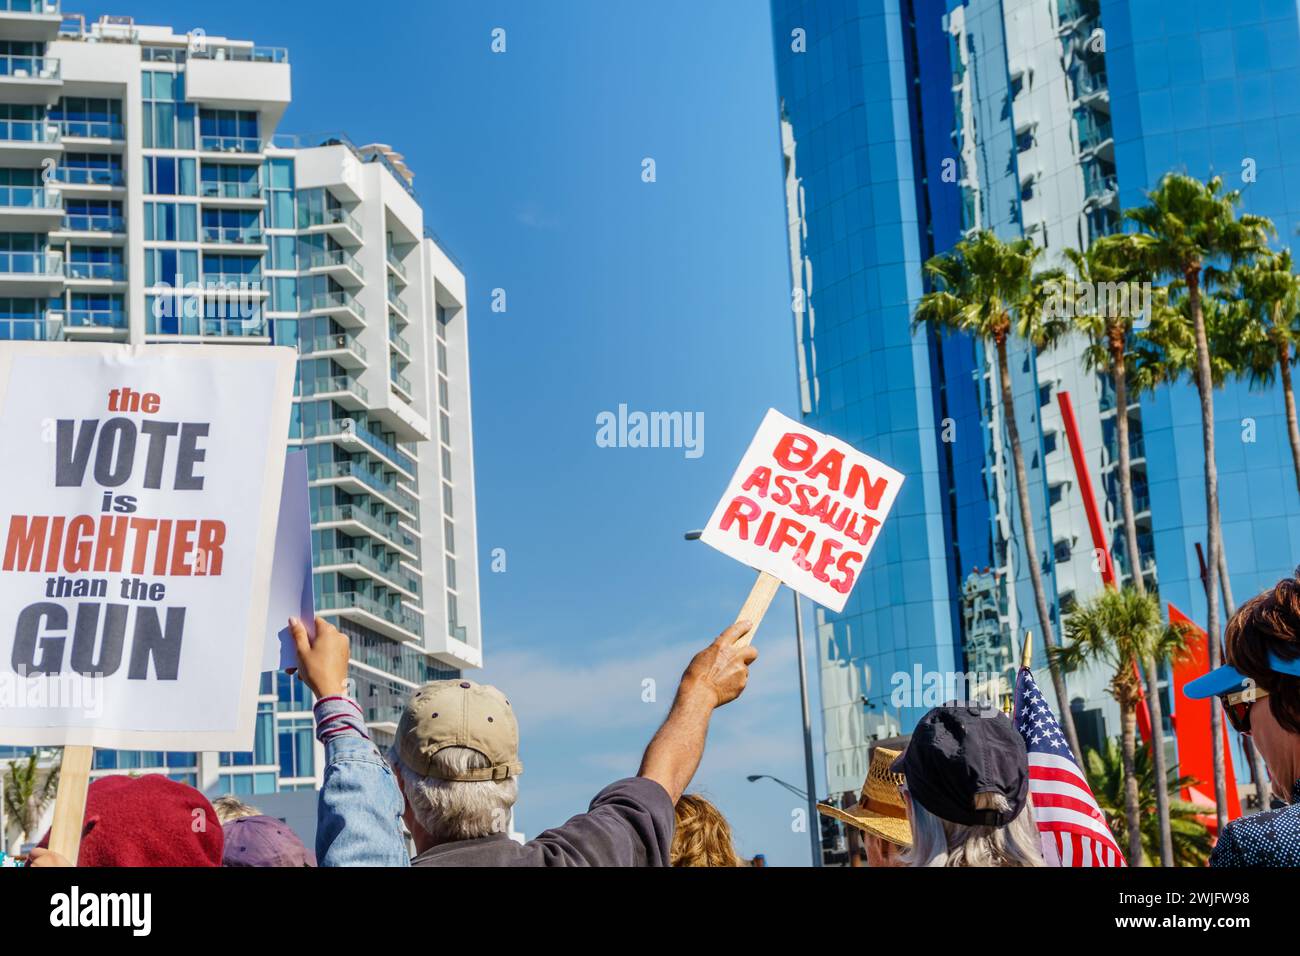 Sarasota, FL, US -March 24, 2018 - Protesters gather at the student-led protest March For Our Lives holding sign reading 'Ban Assault Rifles' Stock Photo